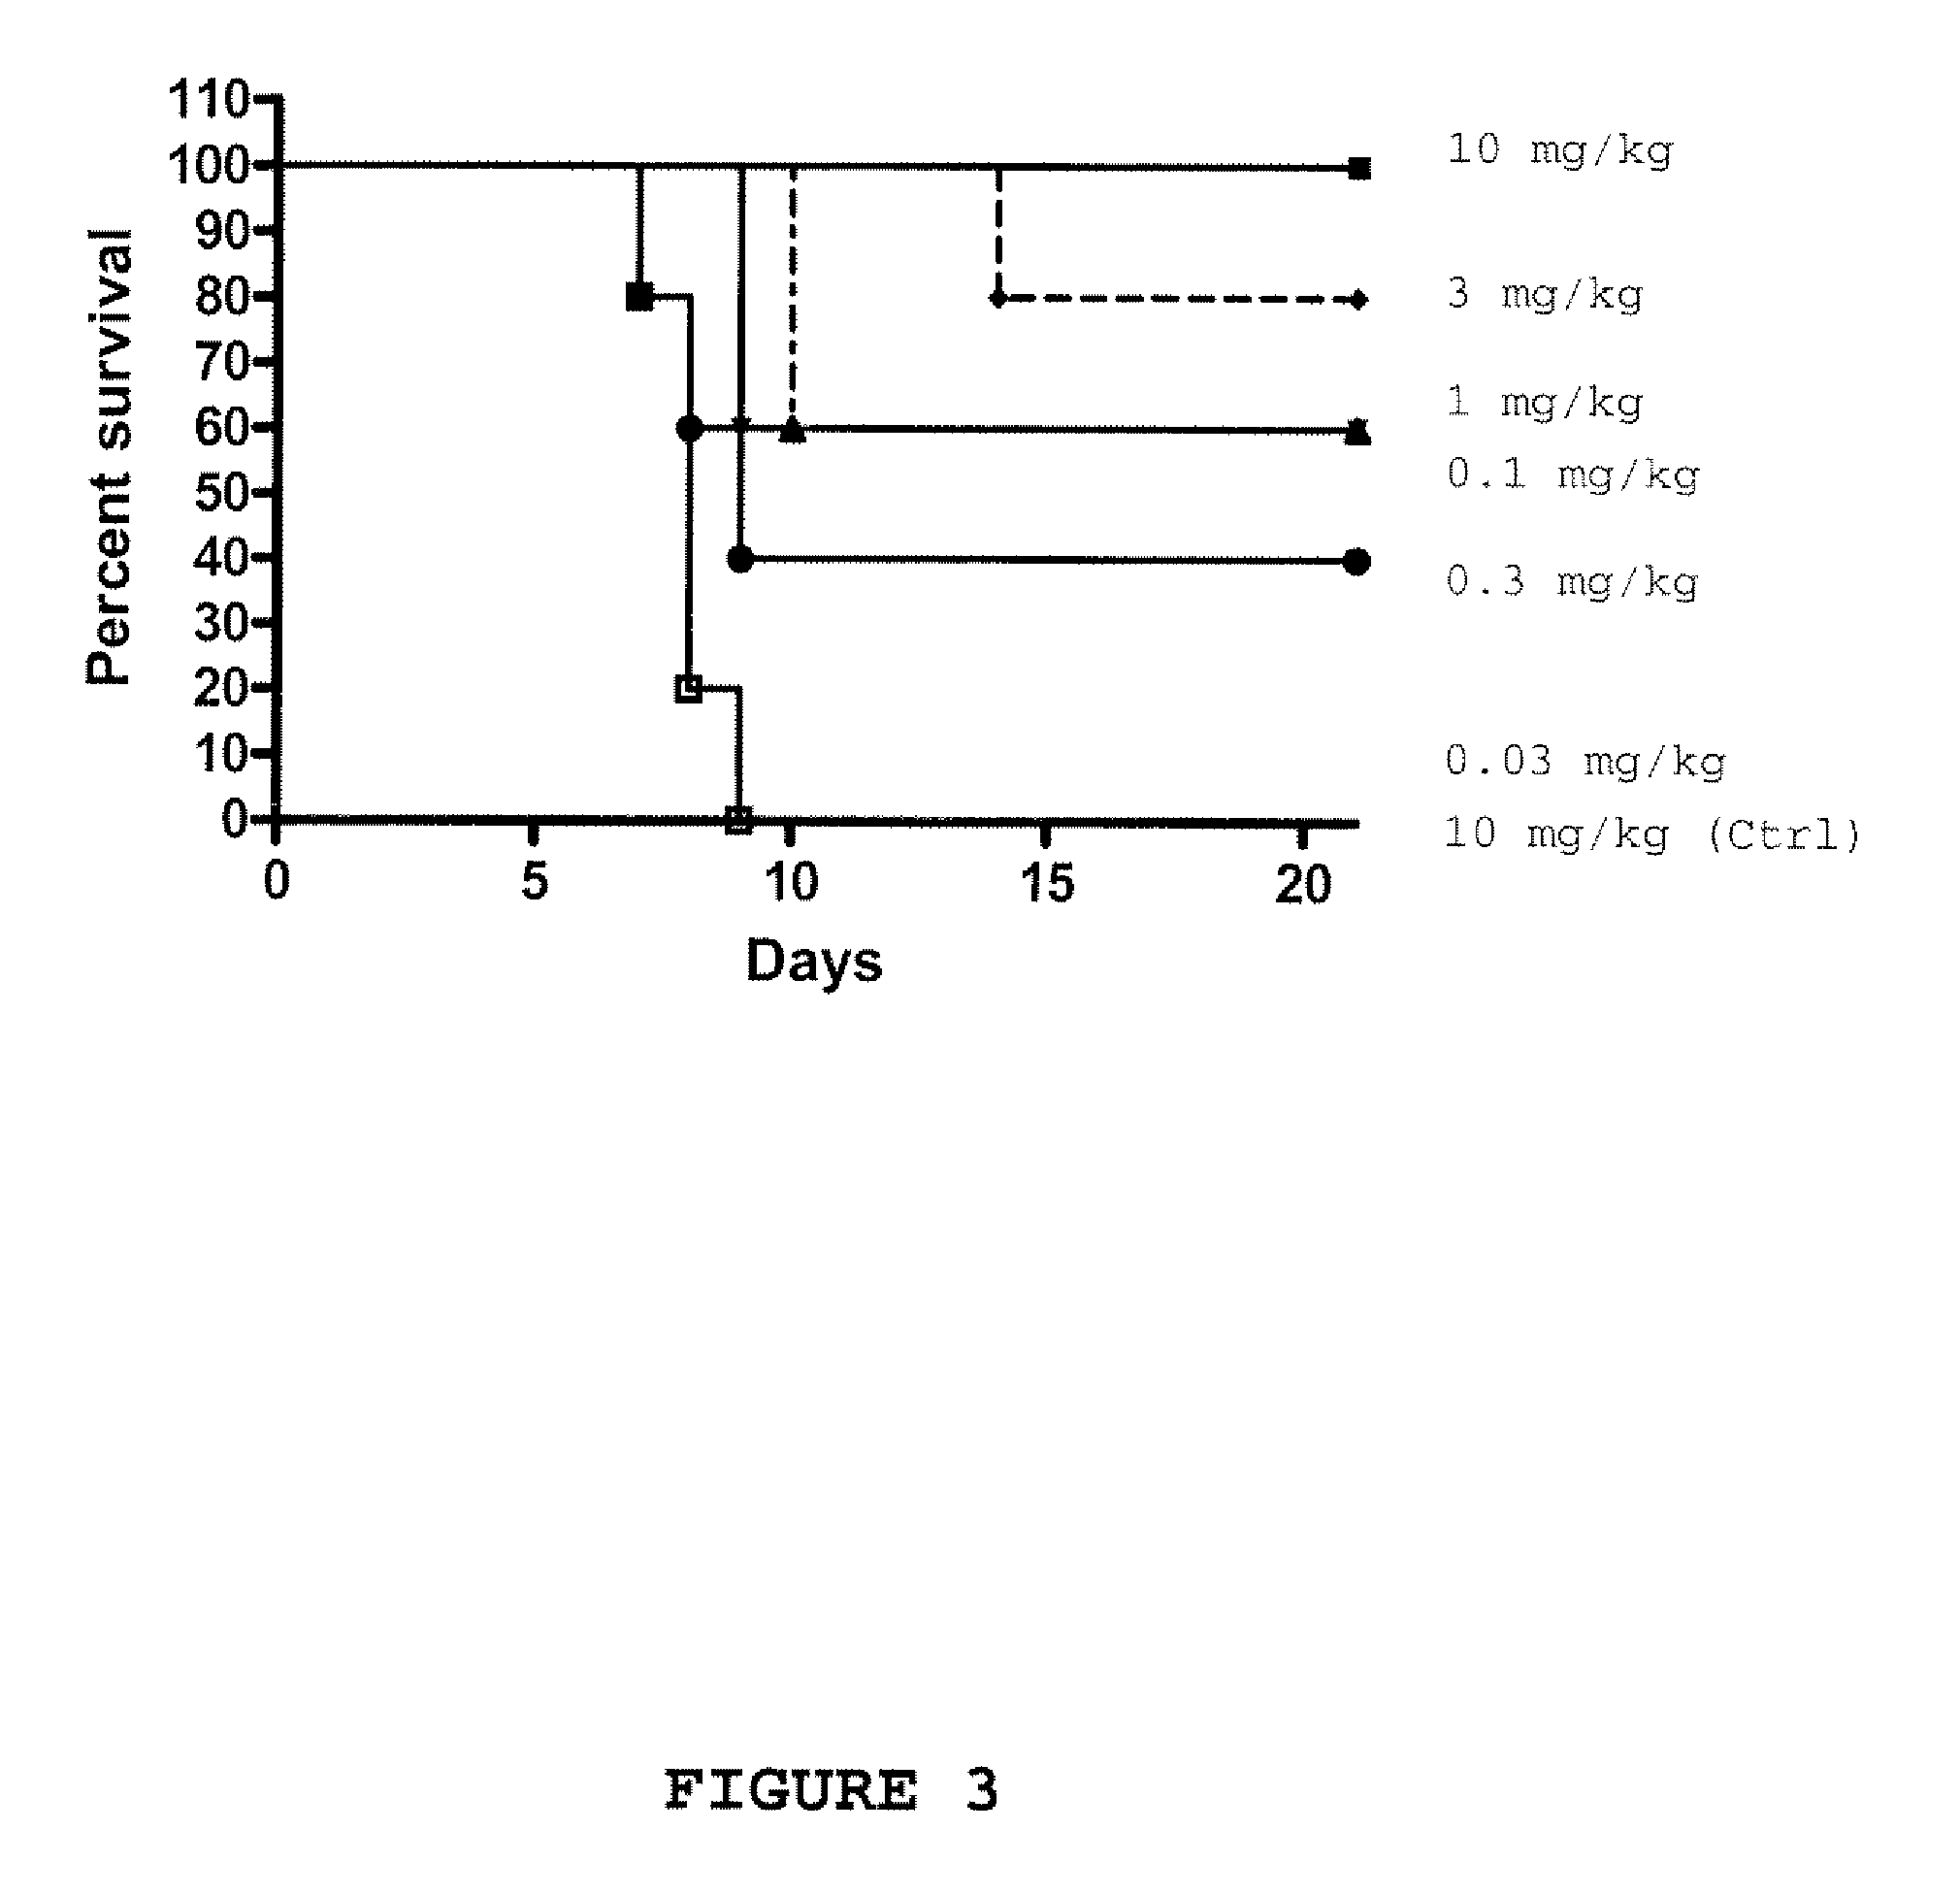 Binding molecules capable of neutralizing west nile virus and uses thereof